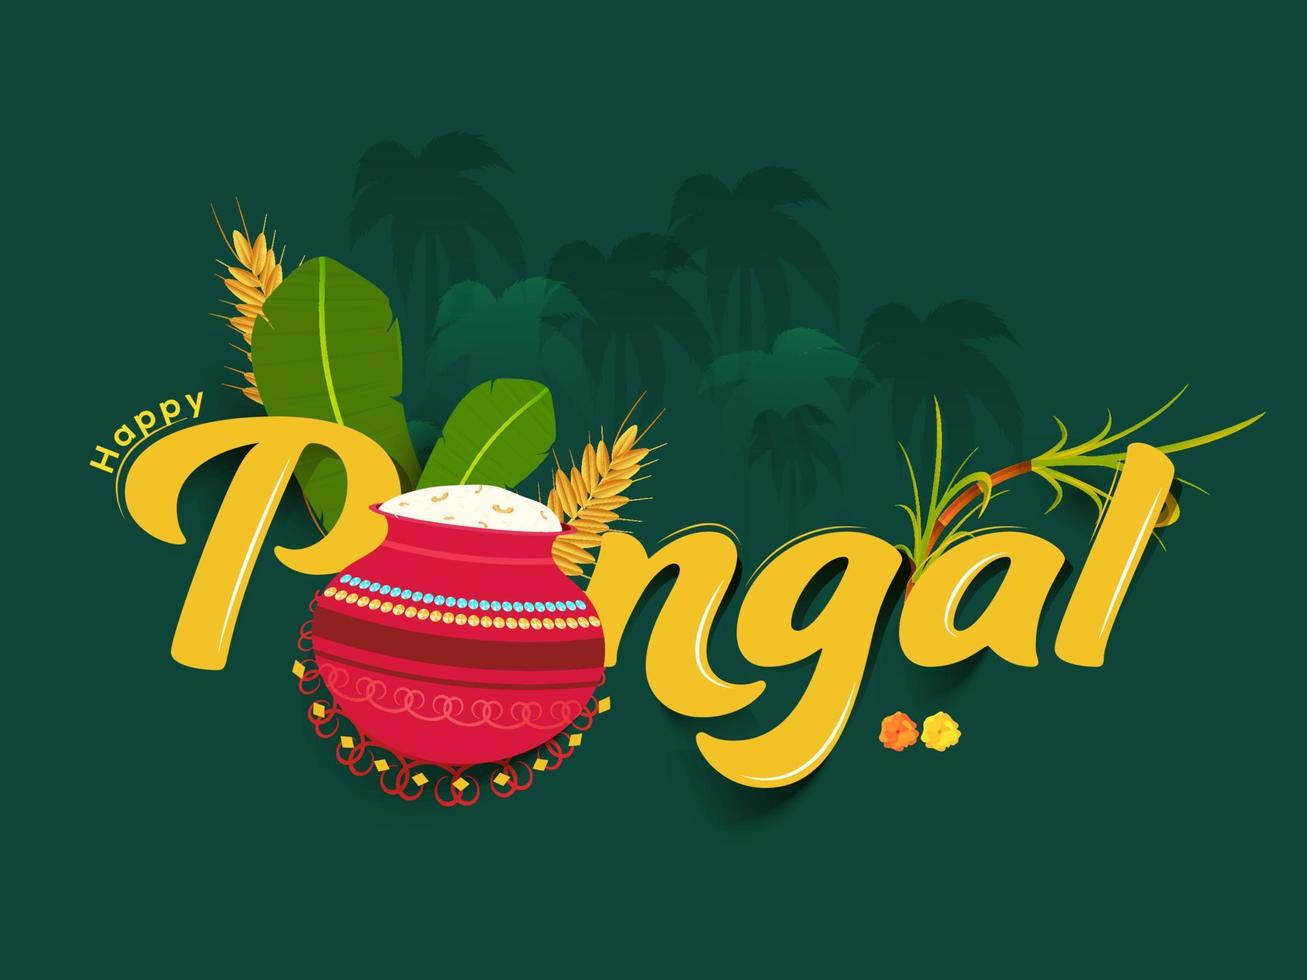 Yellow Happy Pongal Font With Tradition Dish Mud Pot, Wheat Ear, Banana Leaves And Sugarcane On Green Palm Trees Background. vector